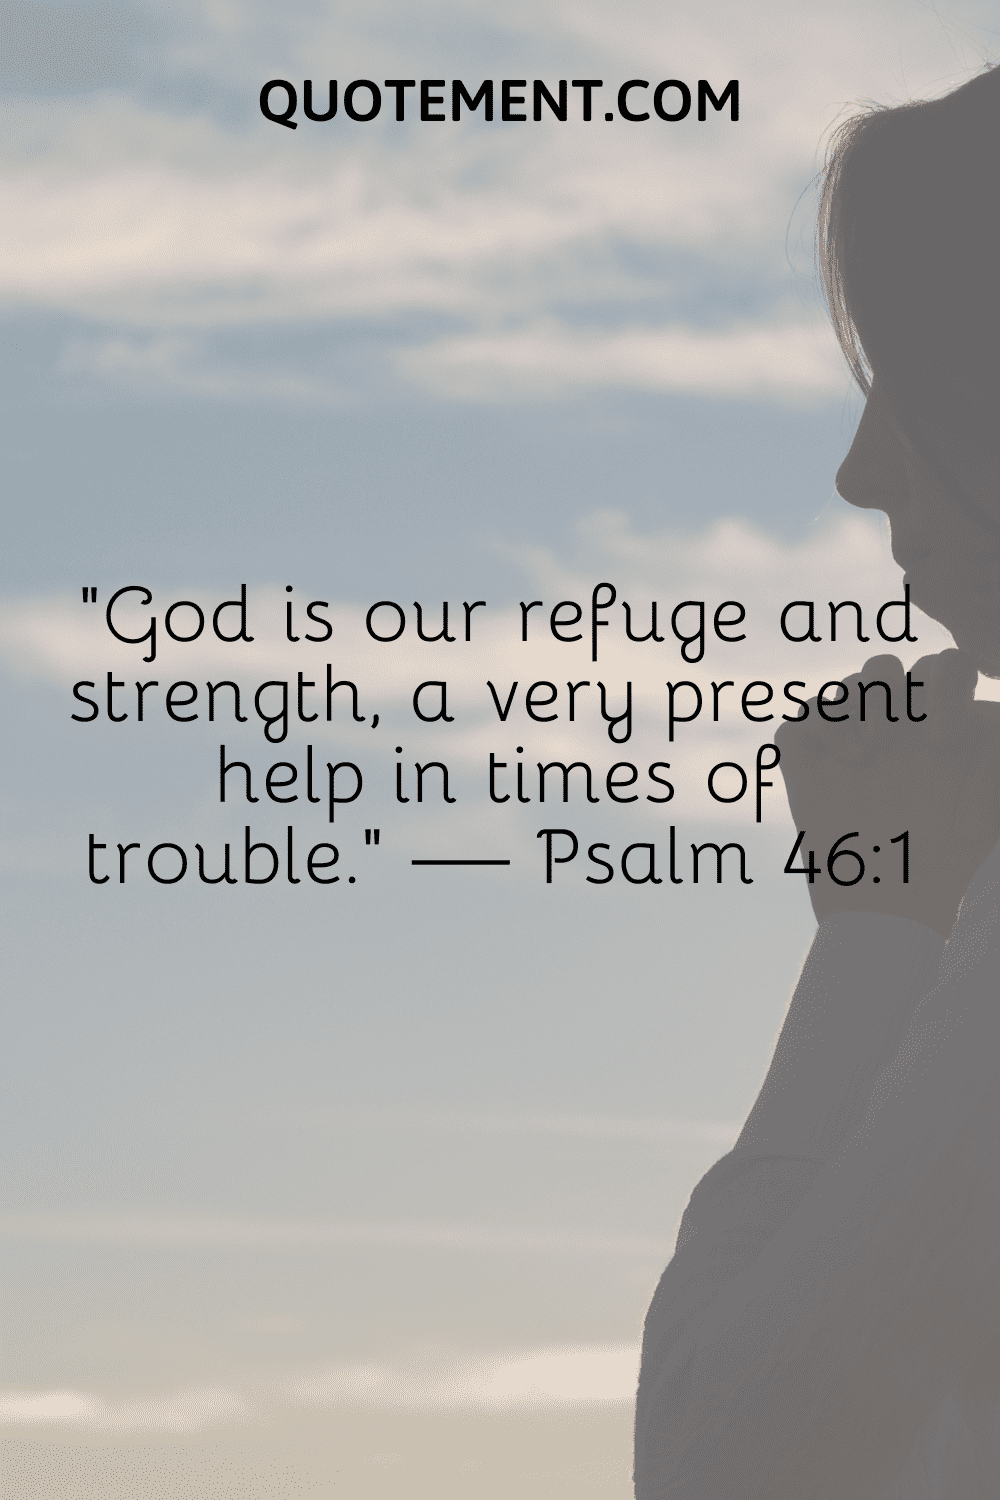 God is our refuge and strength, a very present help in times of trouble.